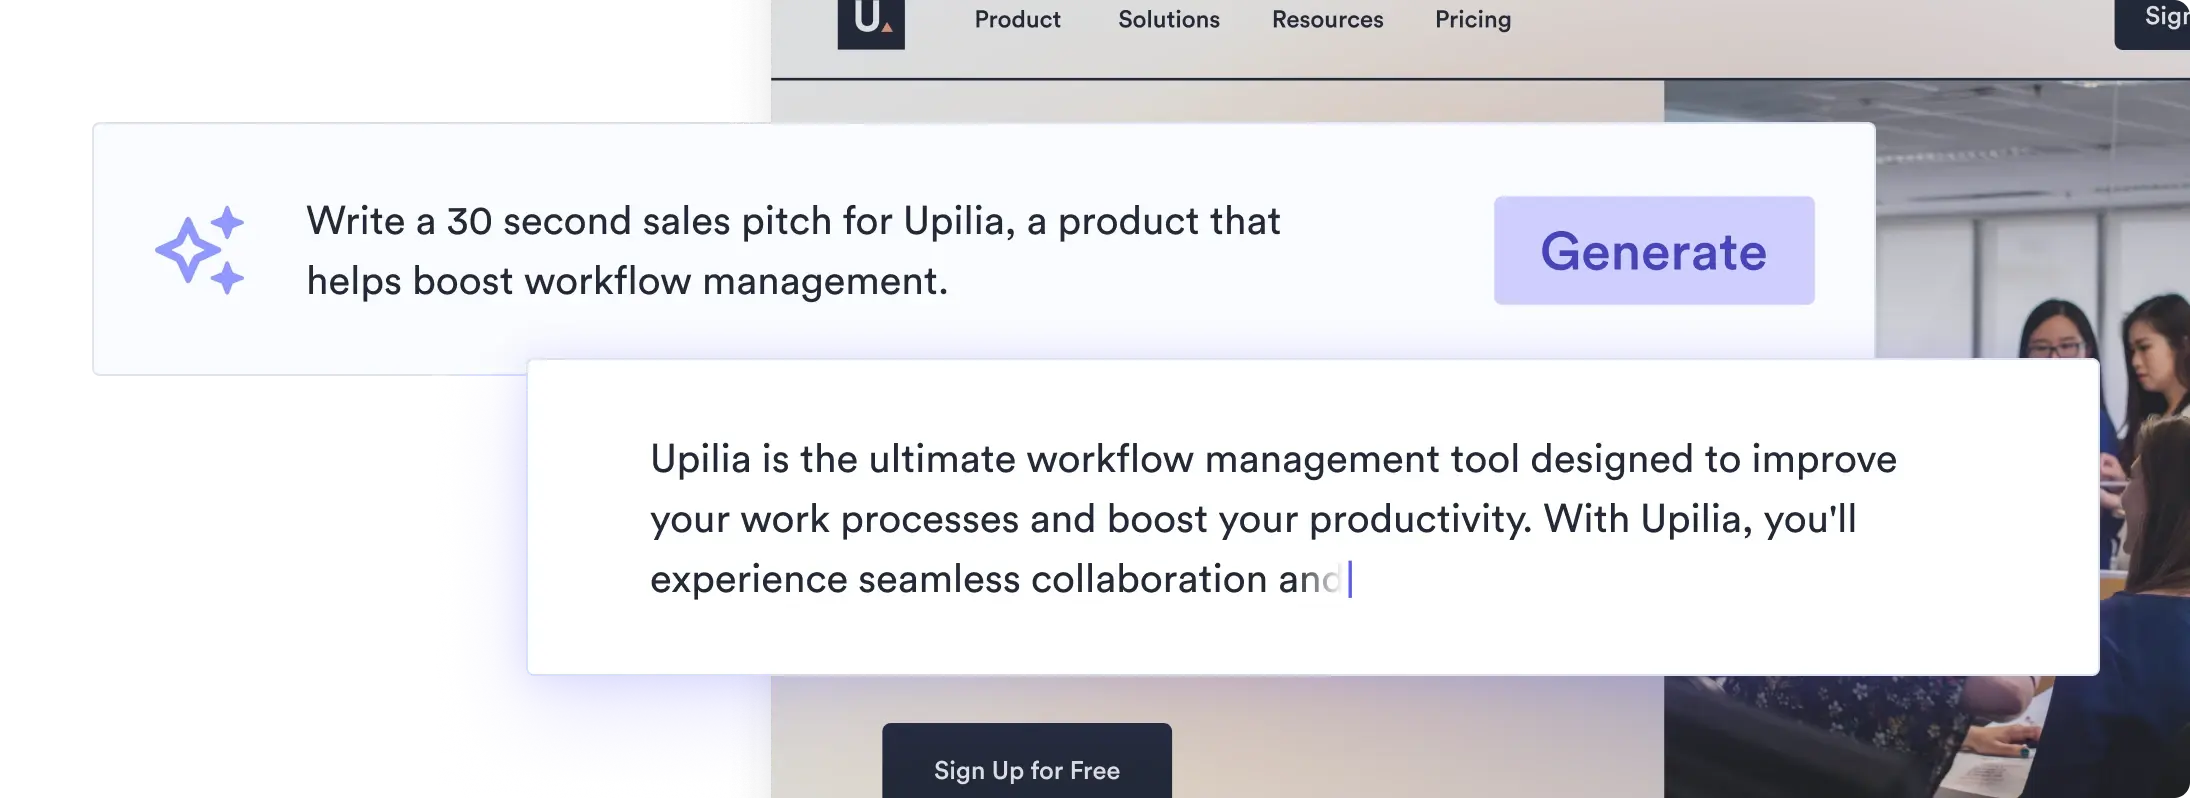 An illustration of an AI pitch generator being told to write a 30-second sales pitch for Upilia, a product that helps boost workflow management. Below the prompt, the AI-created pitch is shown.